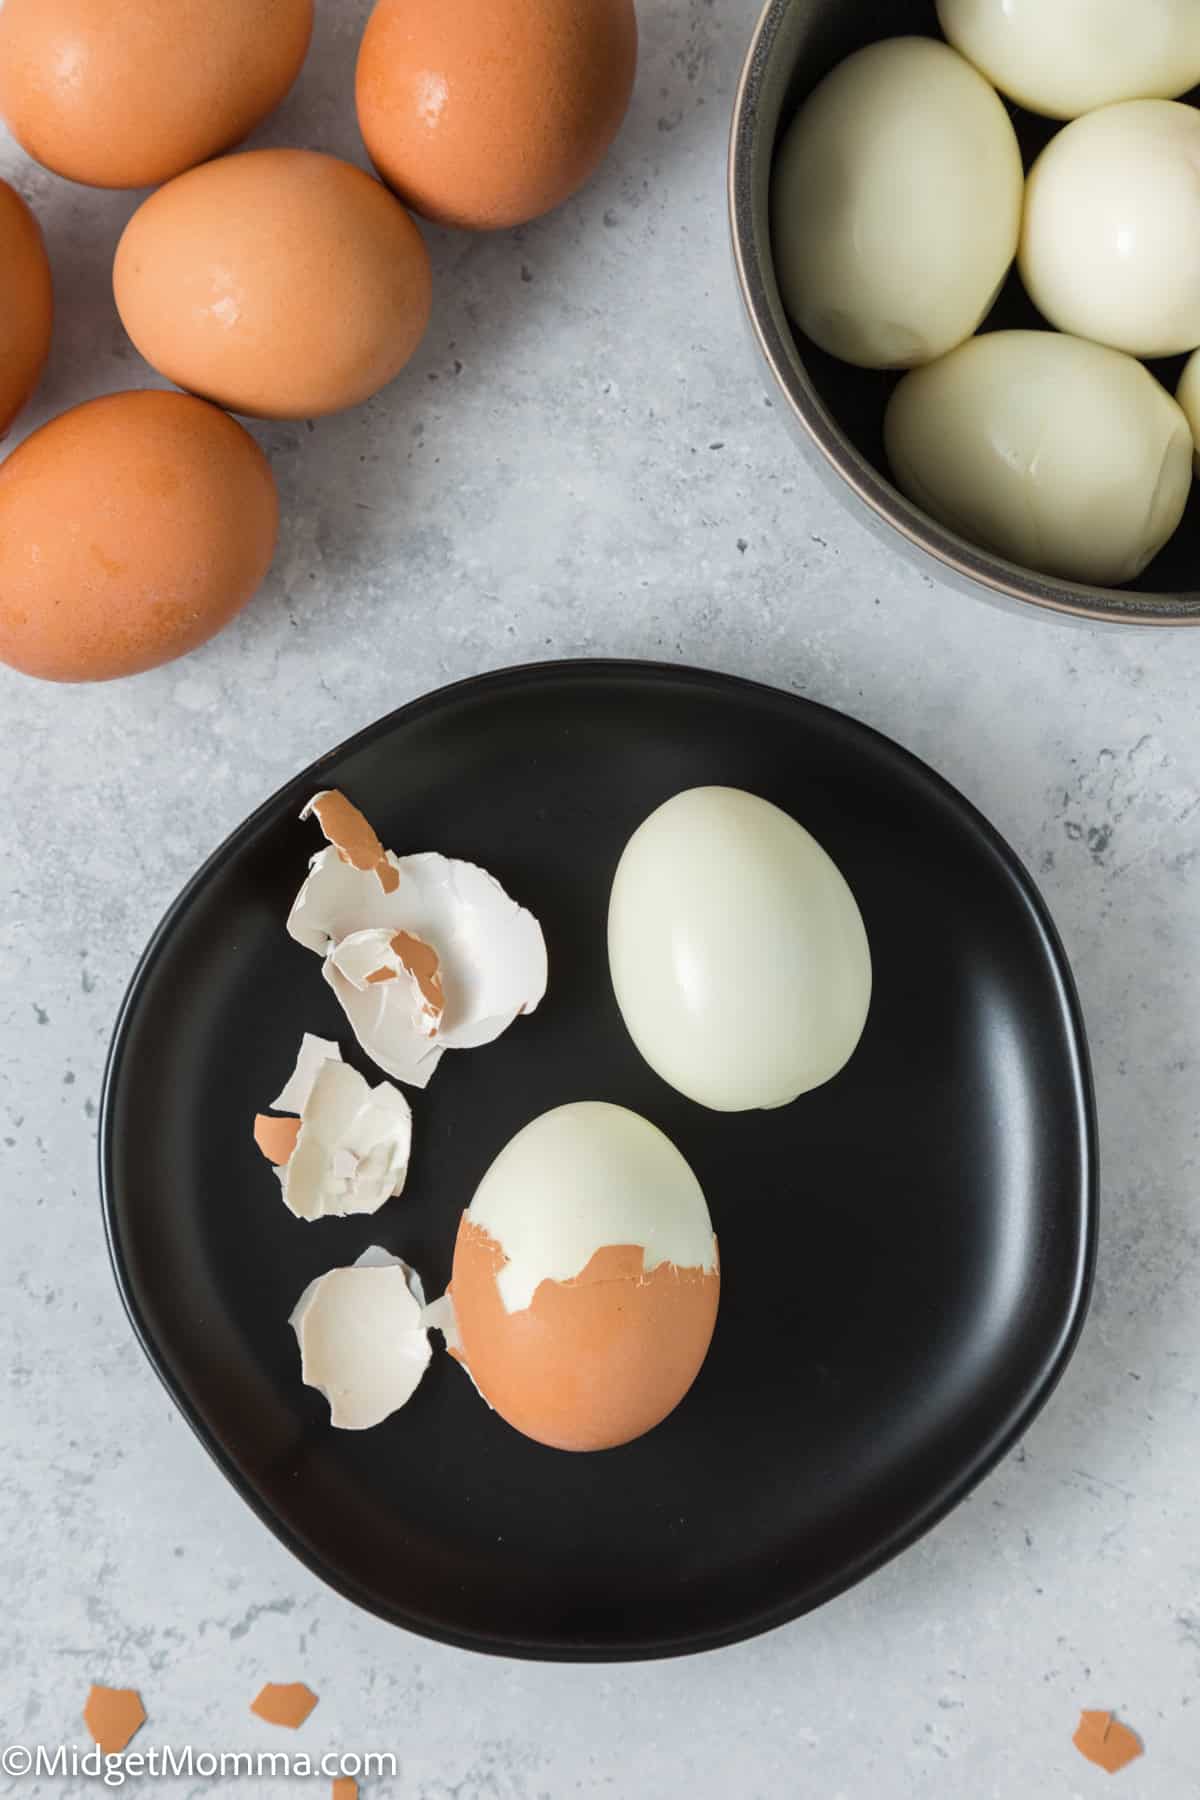 A black plate with one whole peeled hard-boiled egg and eggshell fragments, beside a bowl of unpeeled eggs and a bowl of peeled eggs on a light gray surface.